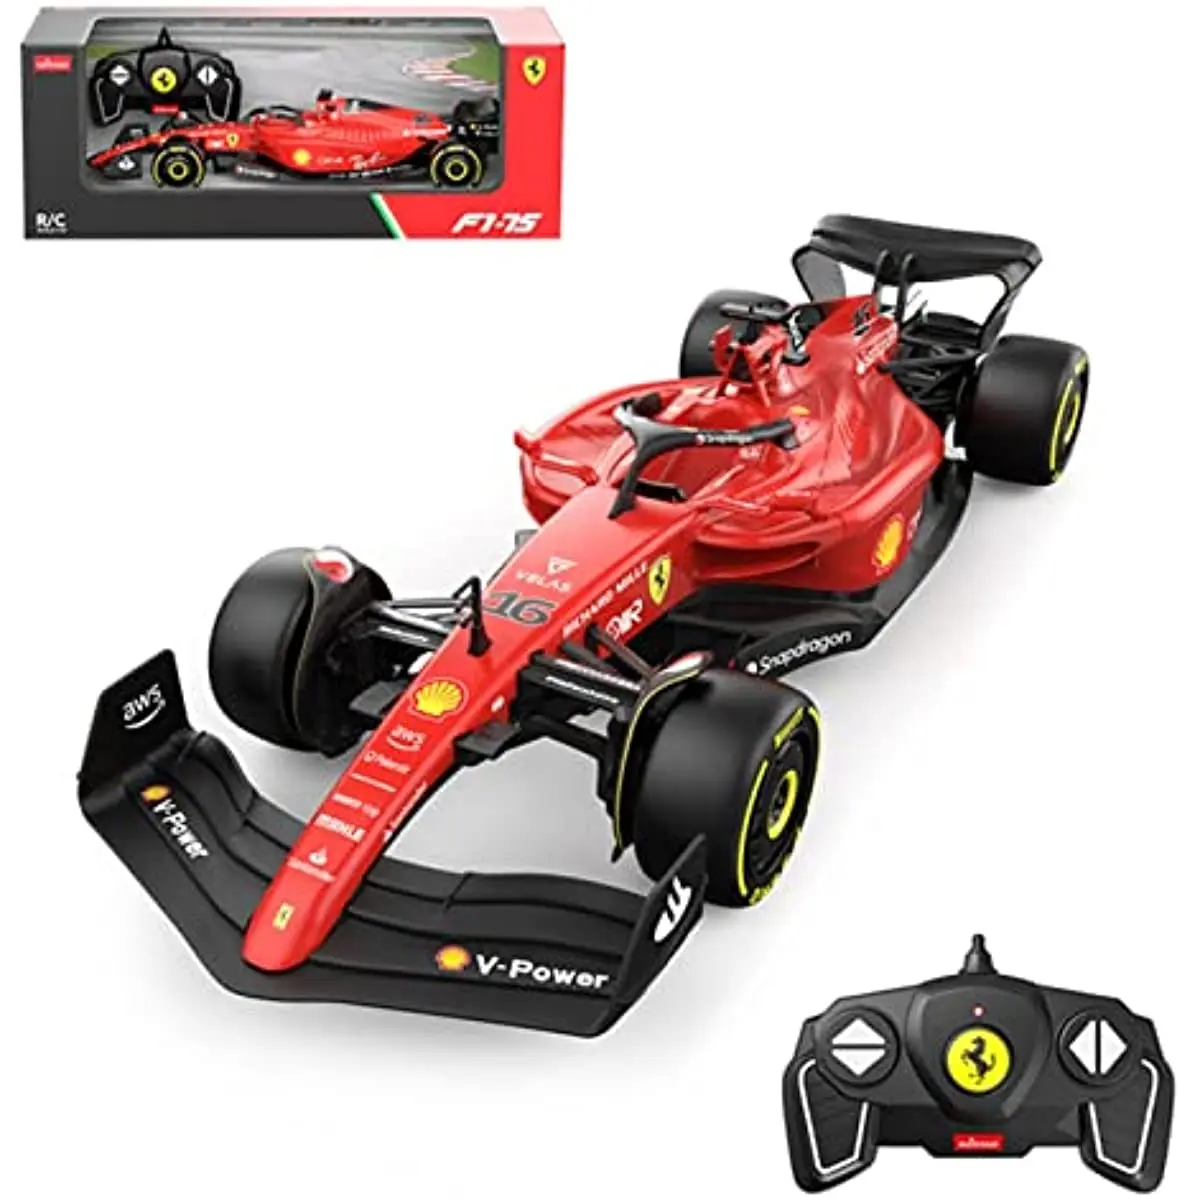 2022 Charles Leclerc Remote Control F1 Racing Car 1:12 Formula One Dynamic Die Cast 1/18 Alloy Collectible Car Model Gifts enlarge